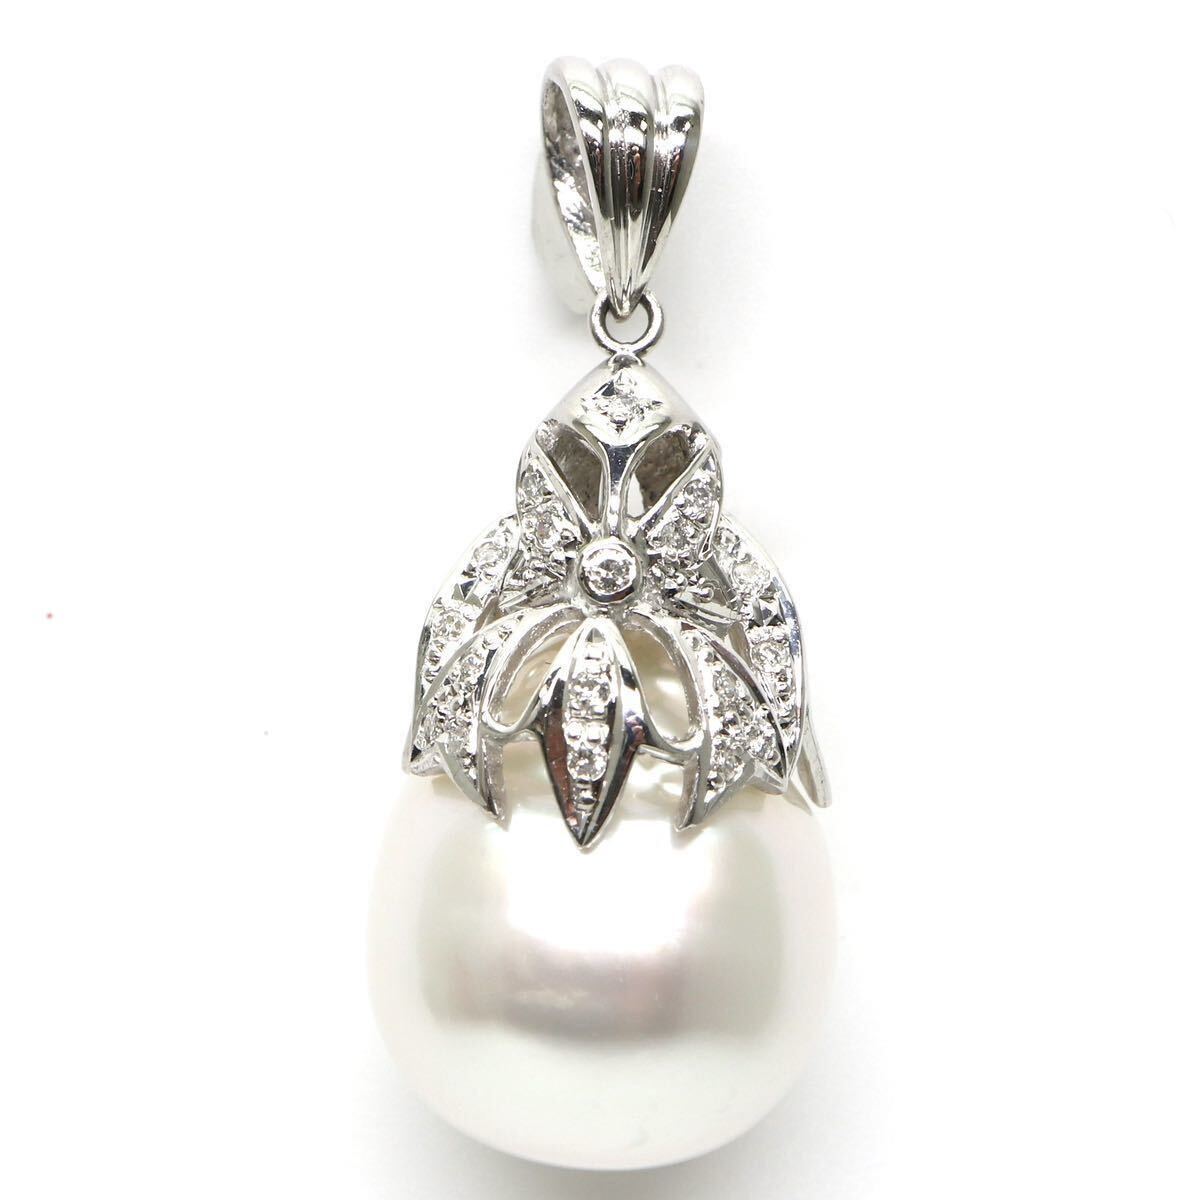  gorgeous!!*Pt900 south . White Butterfly pearl / natural diamond pendant top *M* approximately 9.6g 15.0mm. pearl pearl diamond jewelry necklace ED6/ED6